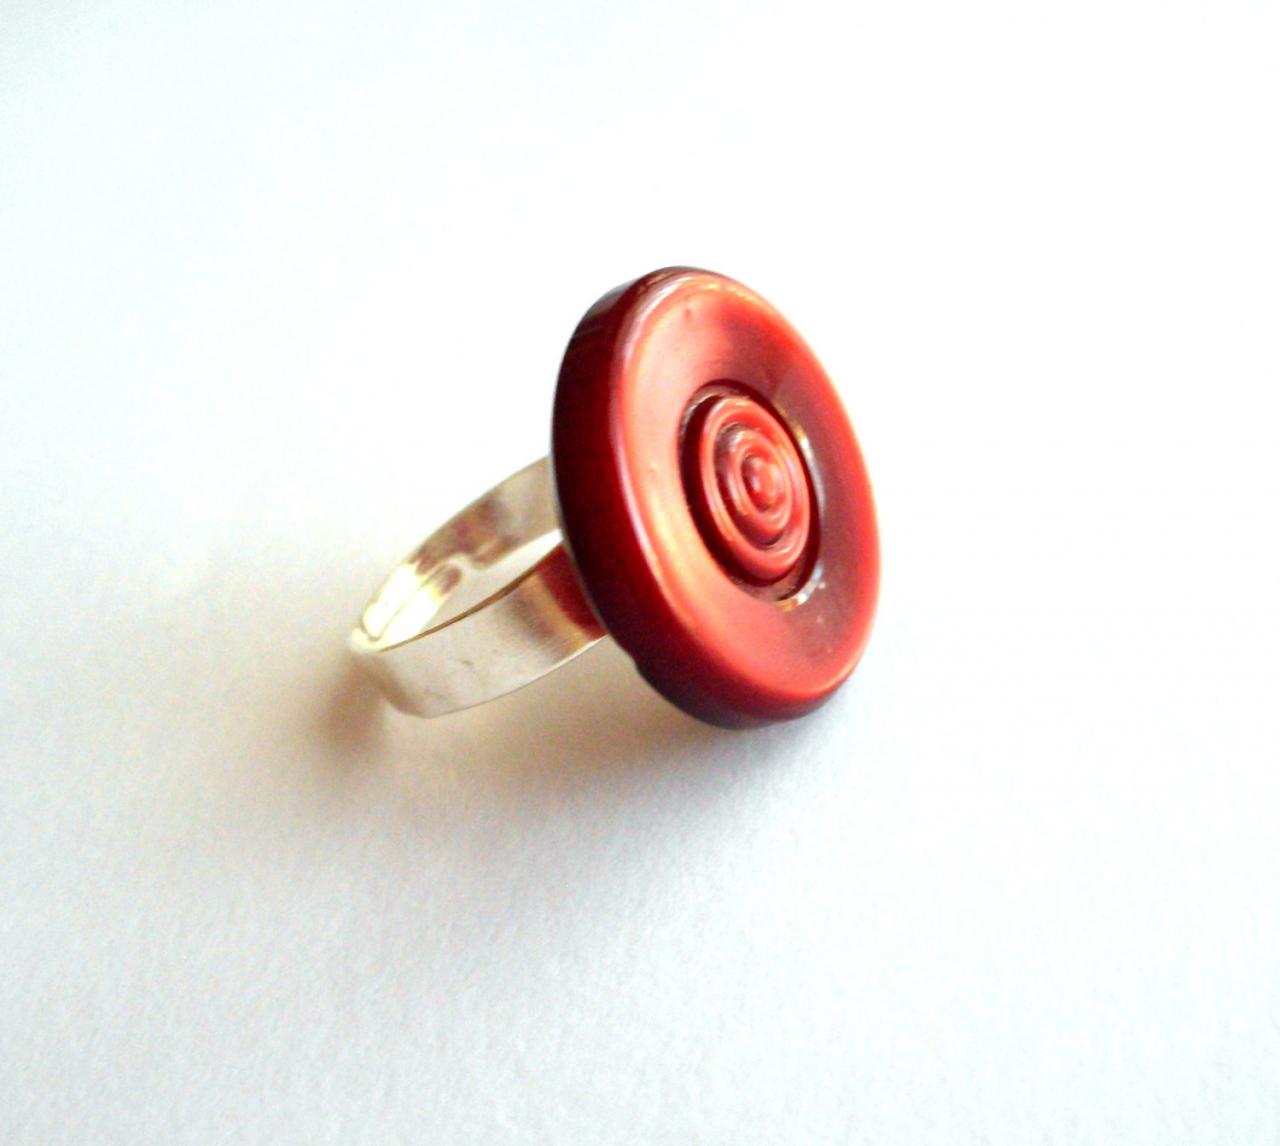 Adjustable Ring Made Of Big Red Vintage Buttons - Eco-friendly, Upcycled Jewelry, Repurposed, Sustainable, Ooak